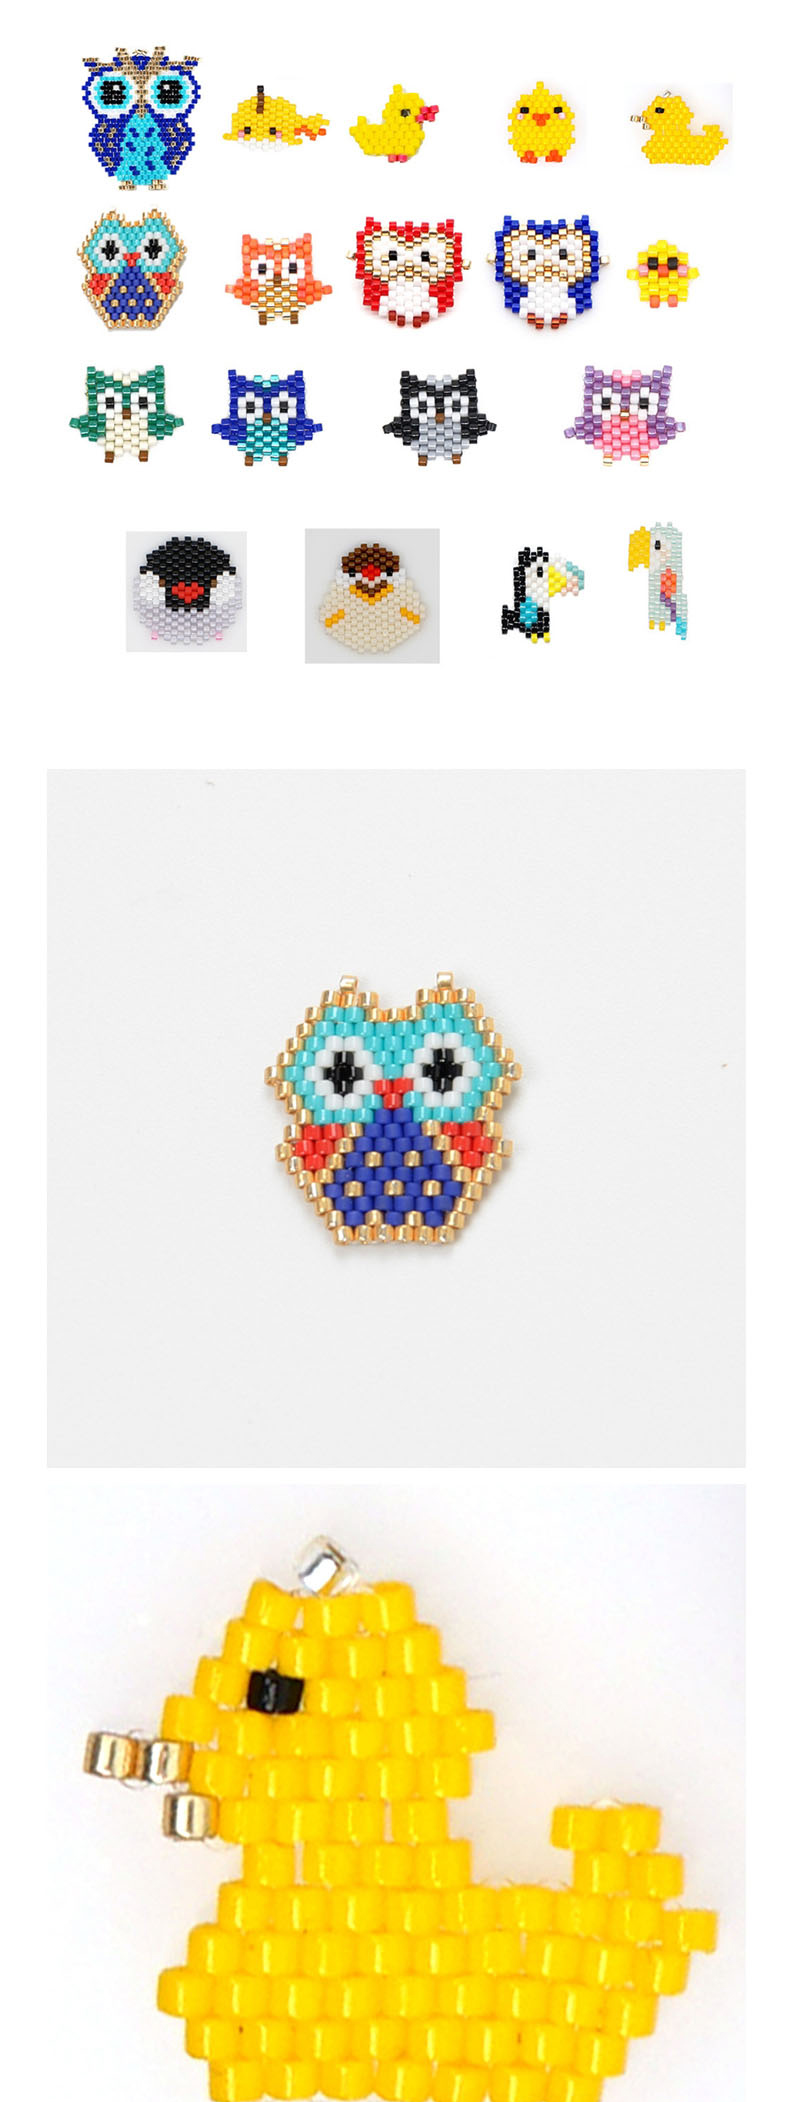 Fashion Blue Owl Bead Woven Bird Accessories,Jewelry Packaging & Displays